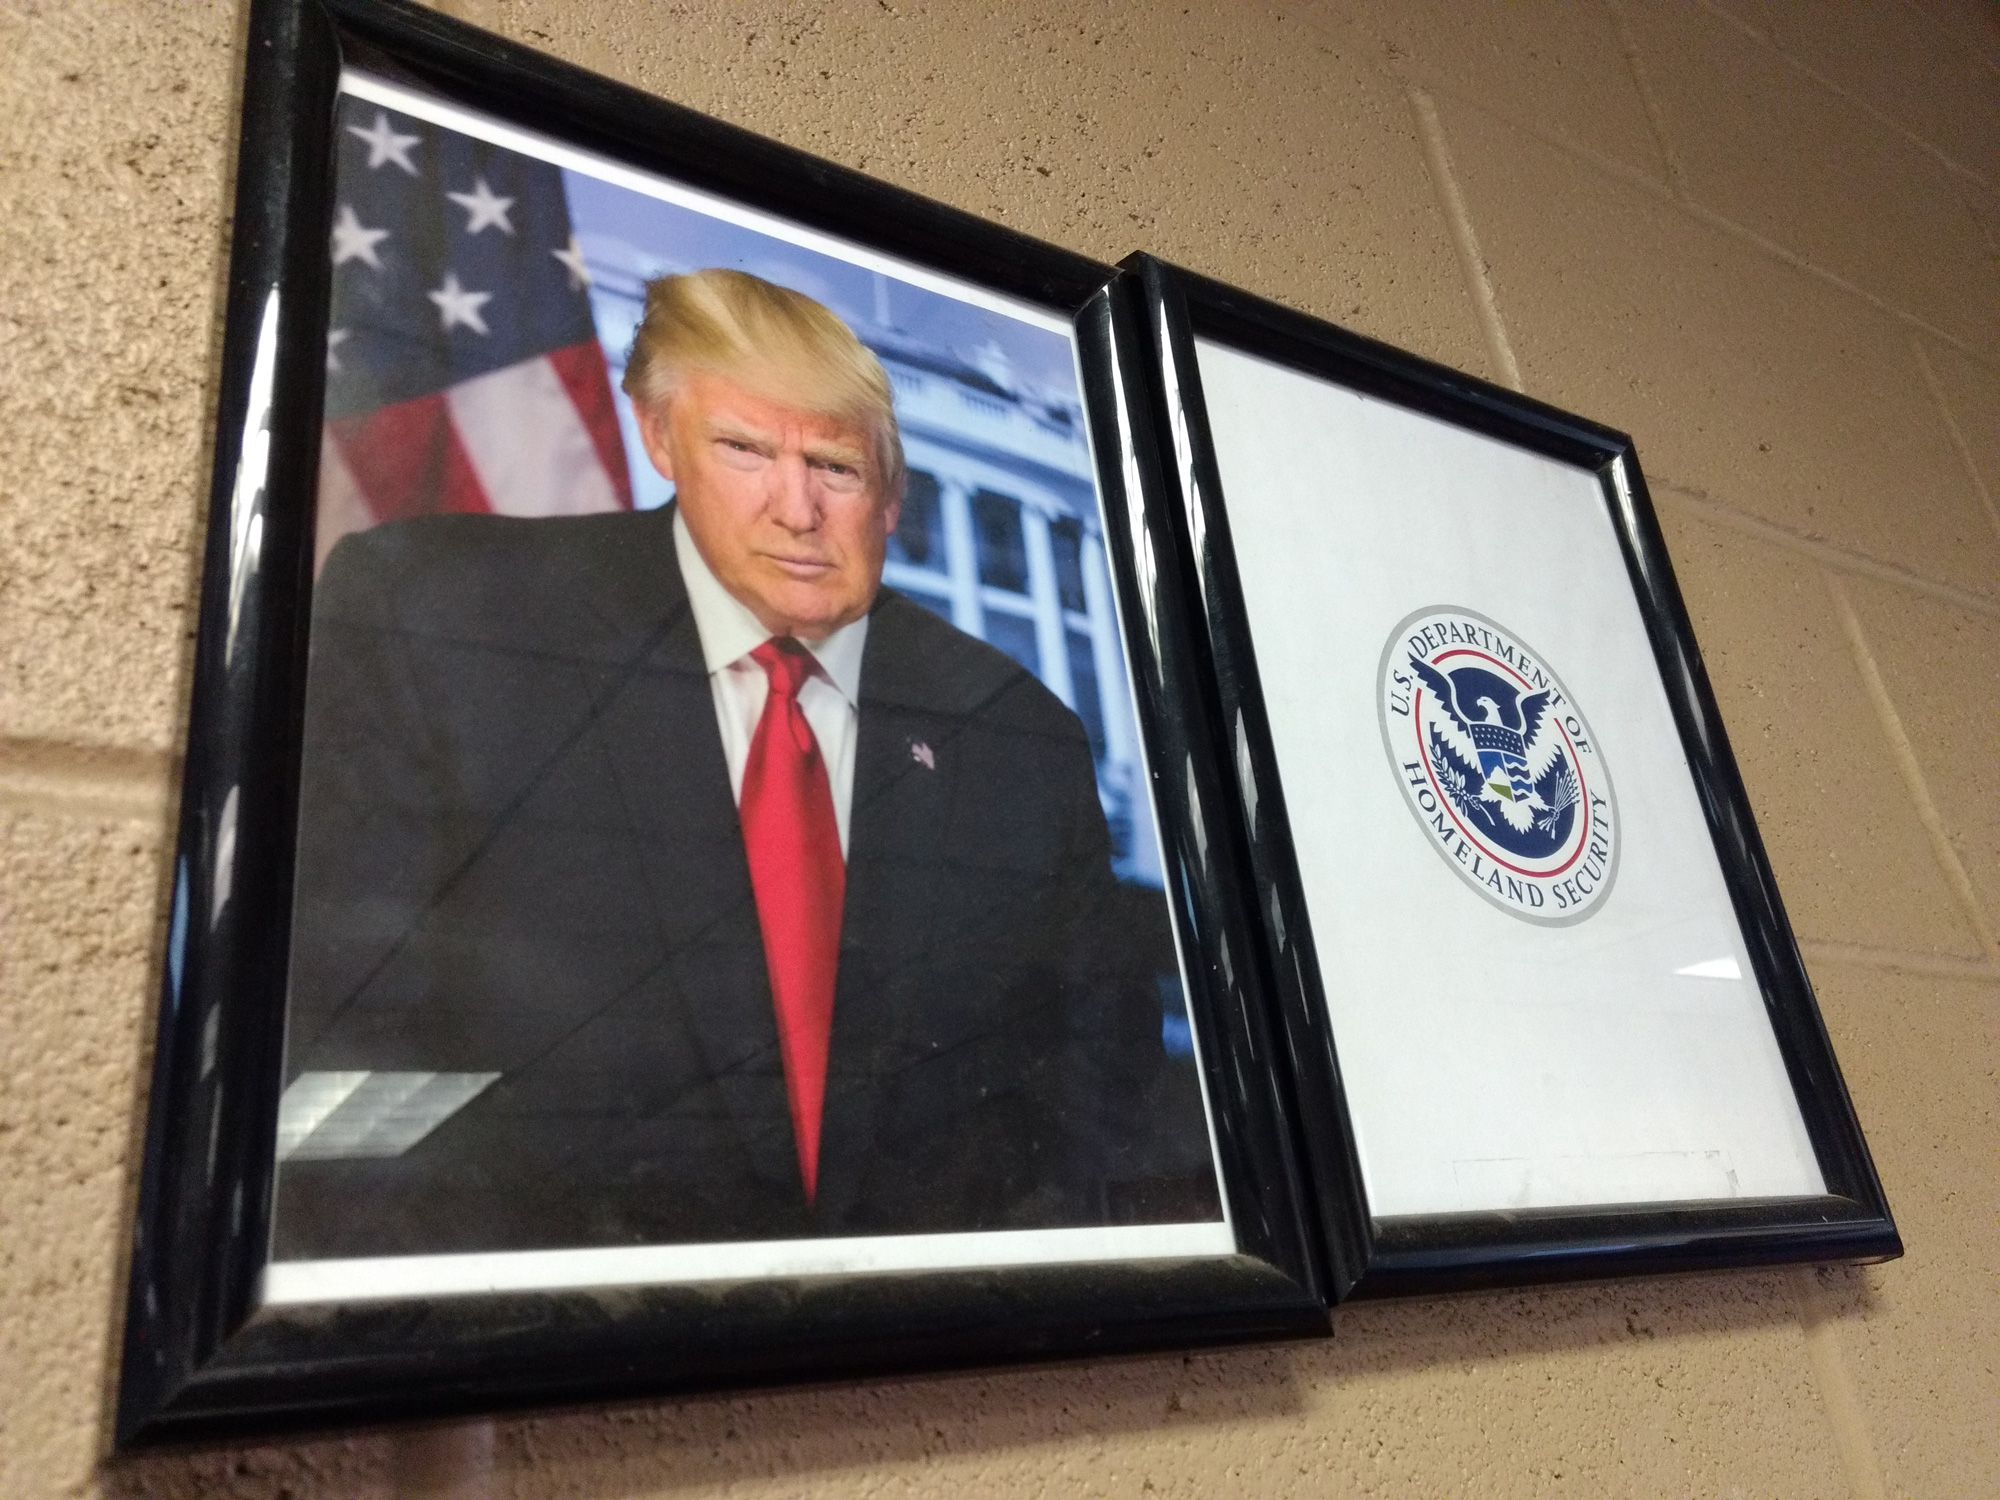 Images of President Trump and Ambassador Castro greet every pedestrian that walks from Agua Prieta to Douglas through the Raul Hector Castro Port of Entry.